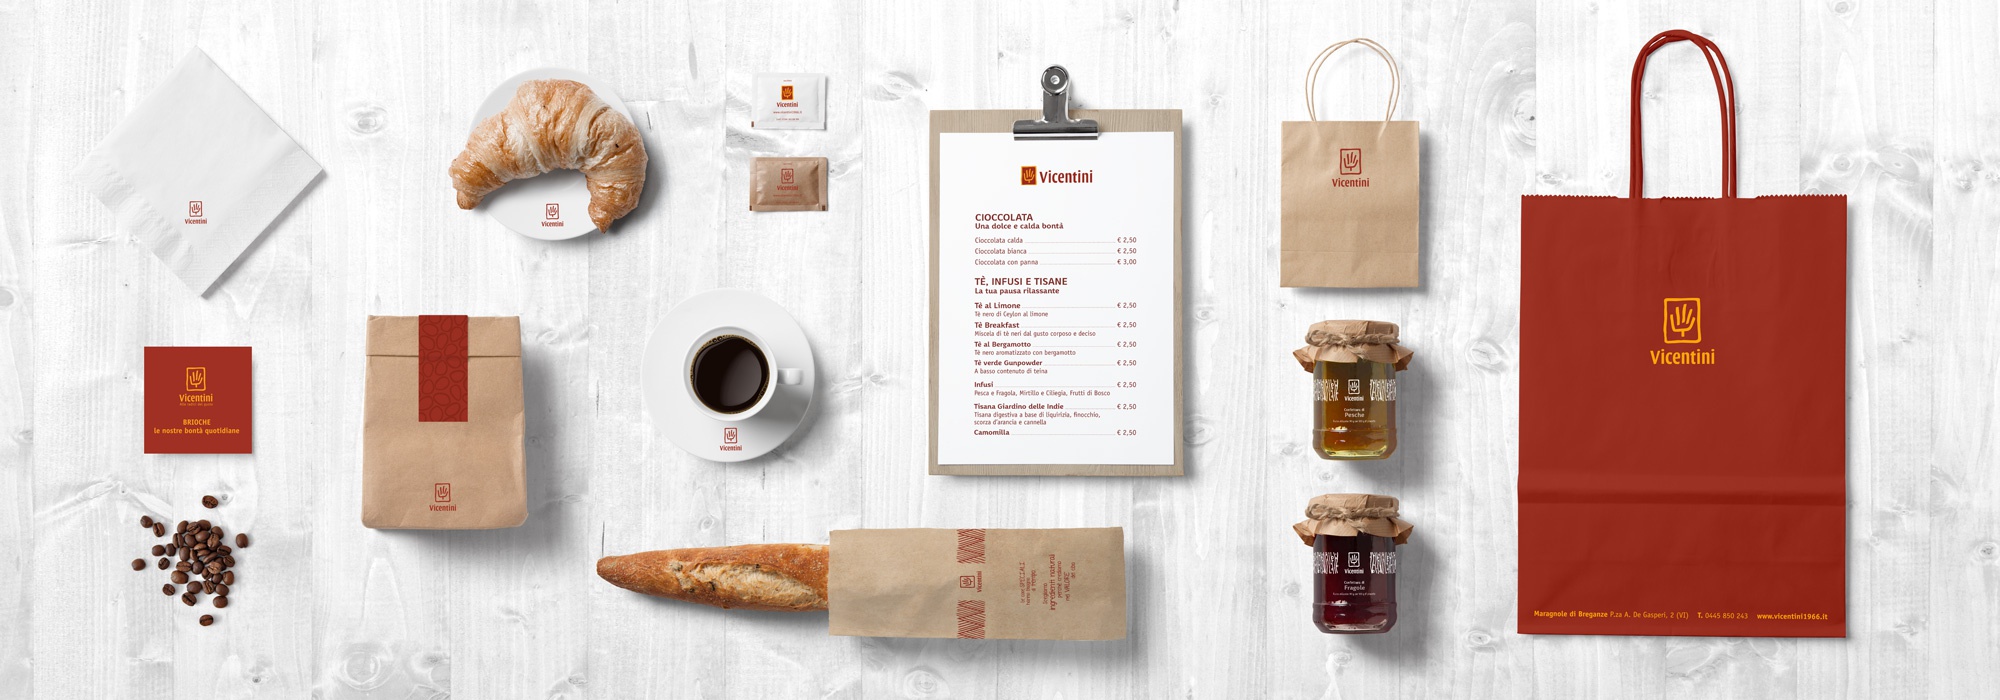 Brand Identity - Product - Packaging - Vicentini